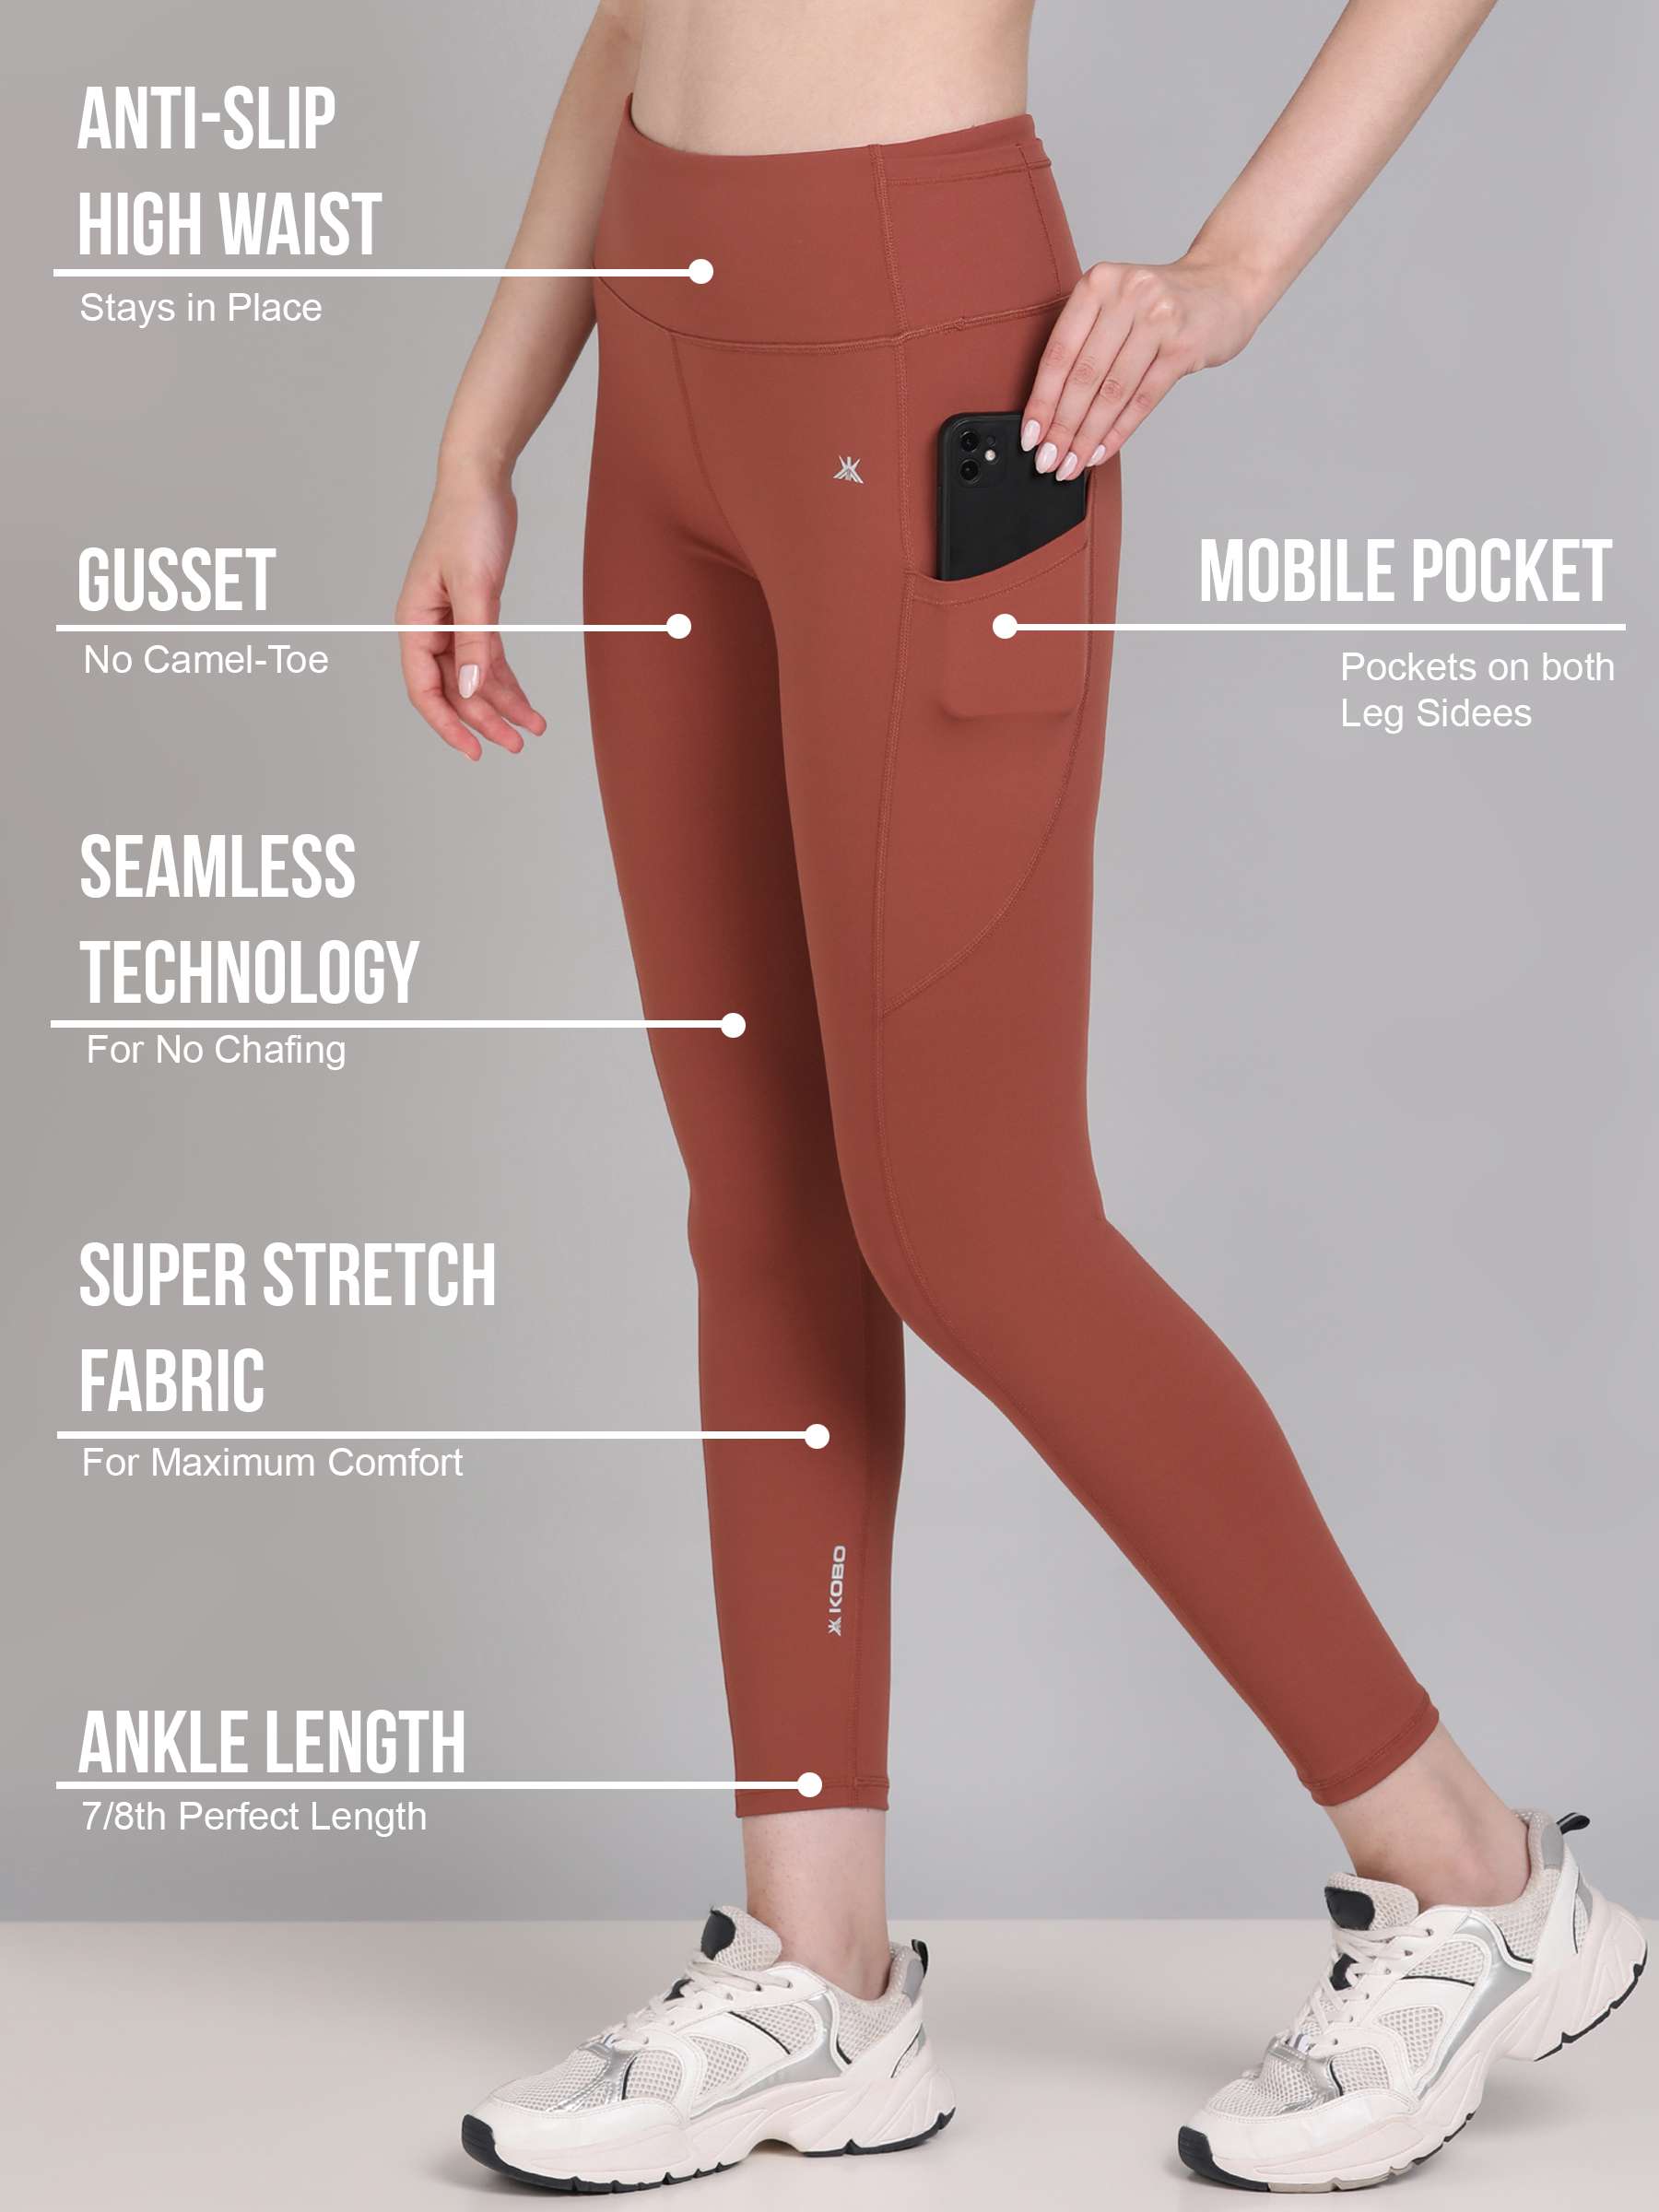 Do It All Solid Tights - KOBO SPORTS Exclusively Designed For Gym Workouts